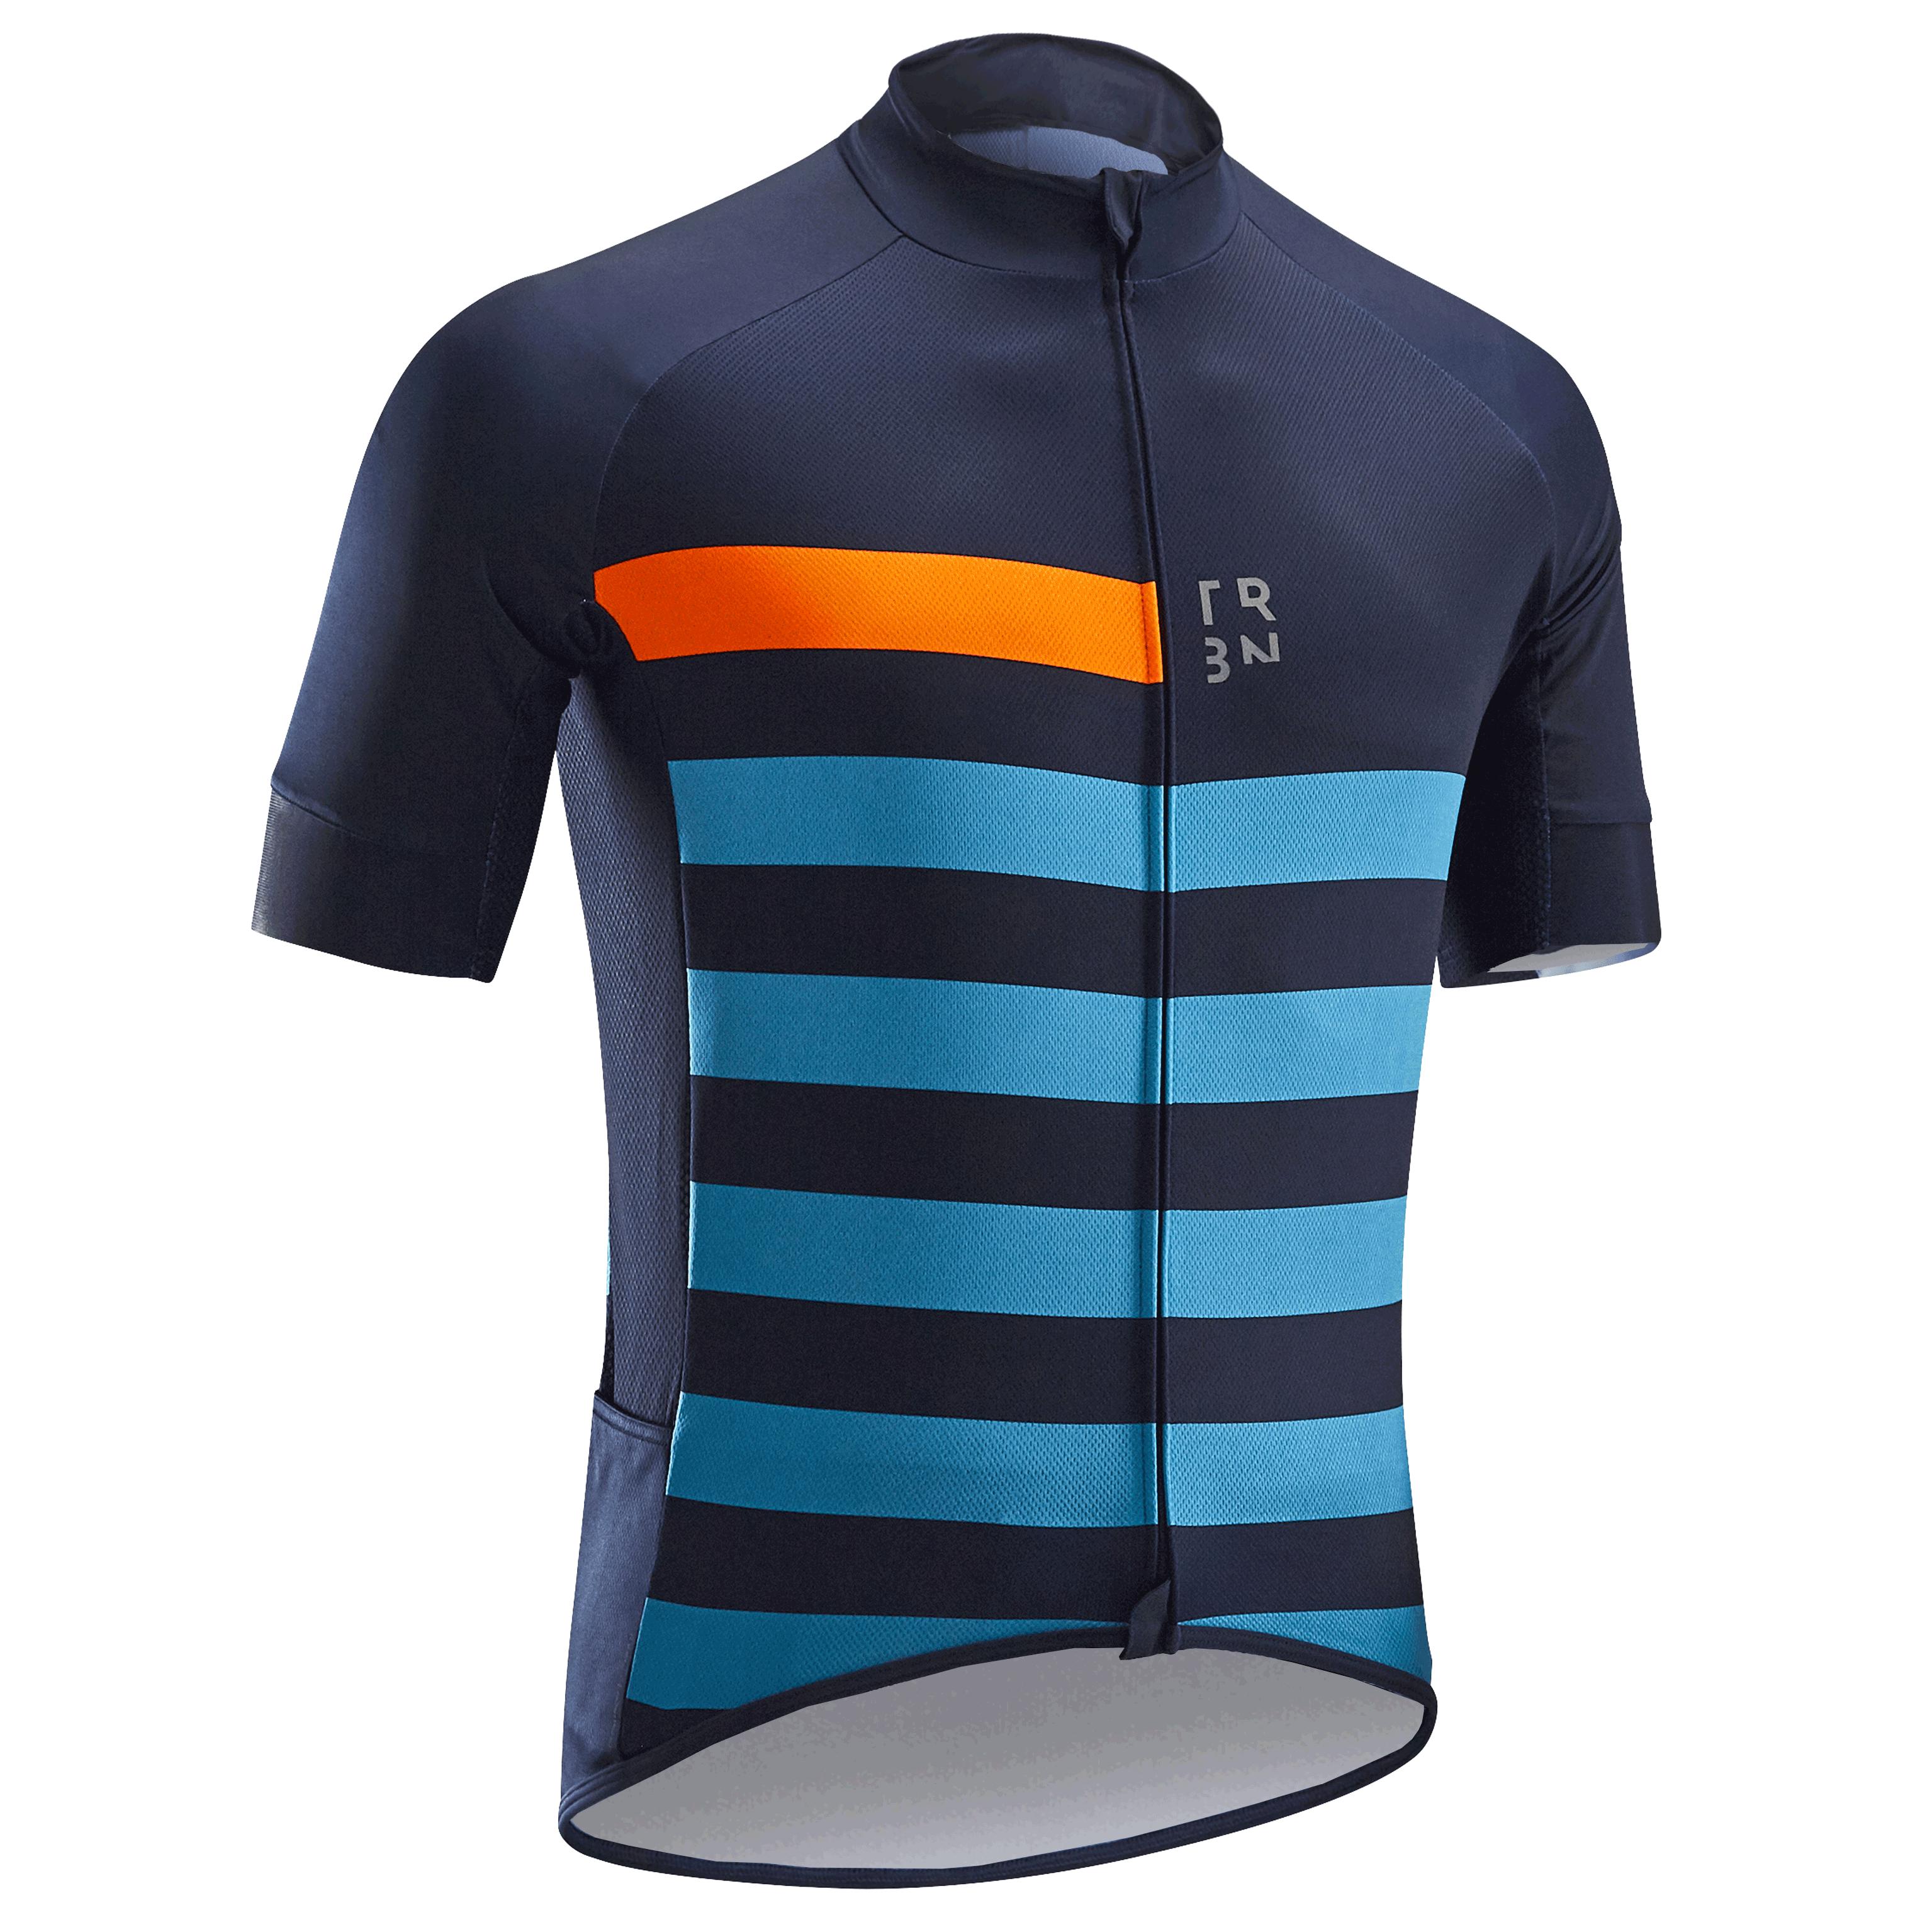 Cycling Jersey \u0026 Clothing Buy Online at 